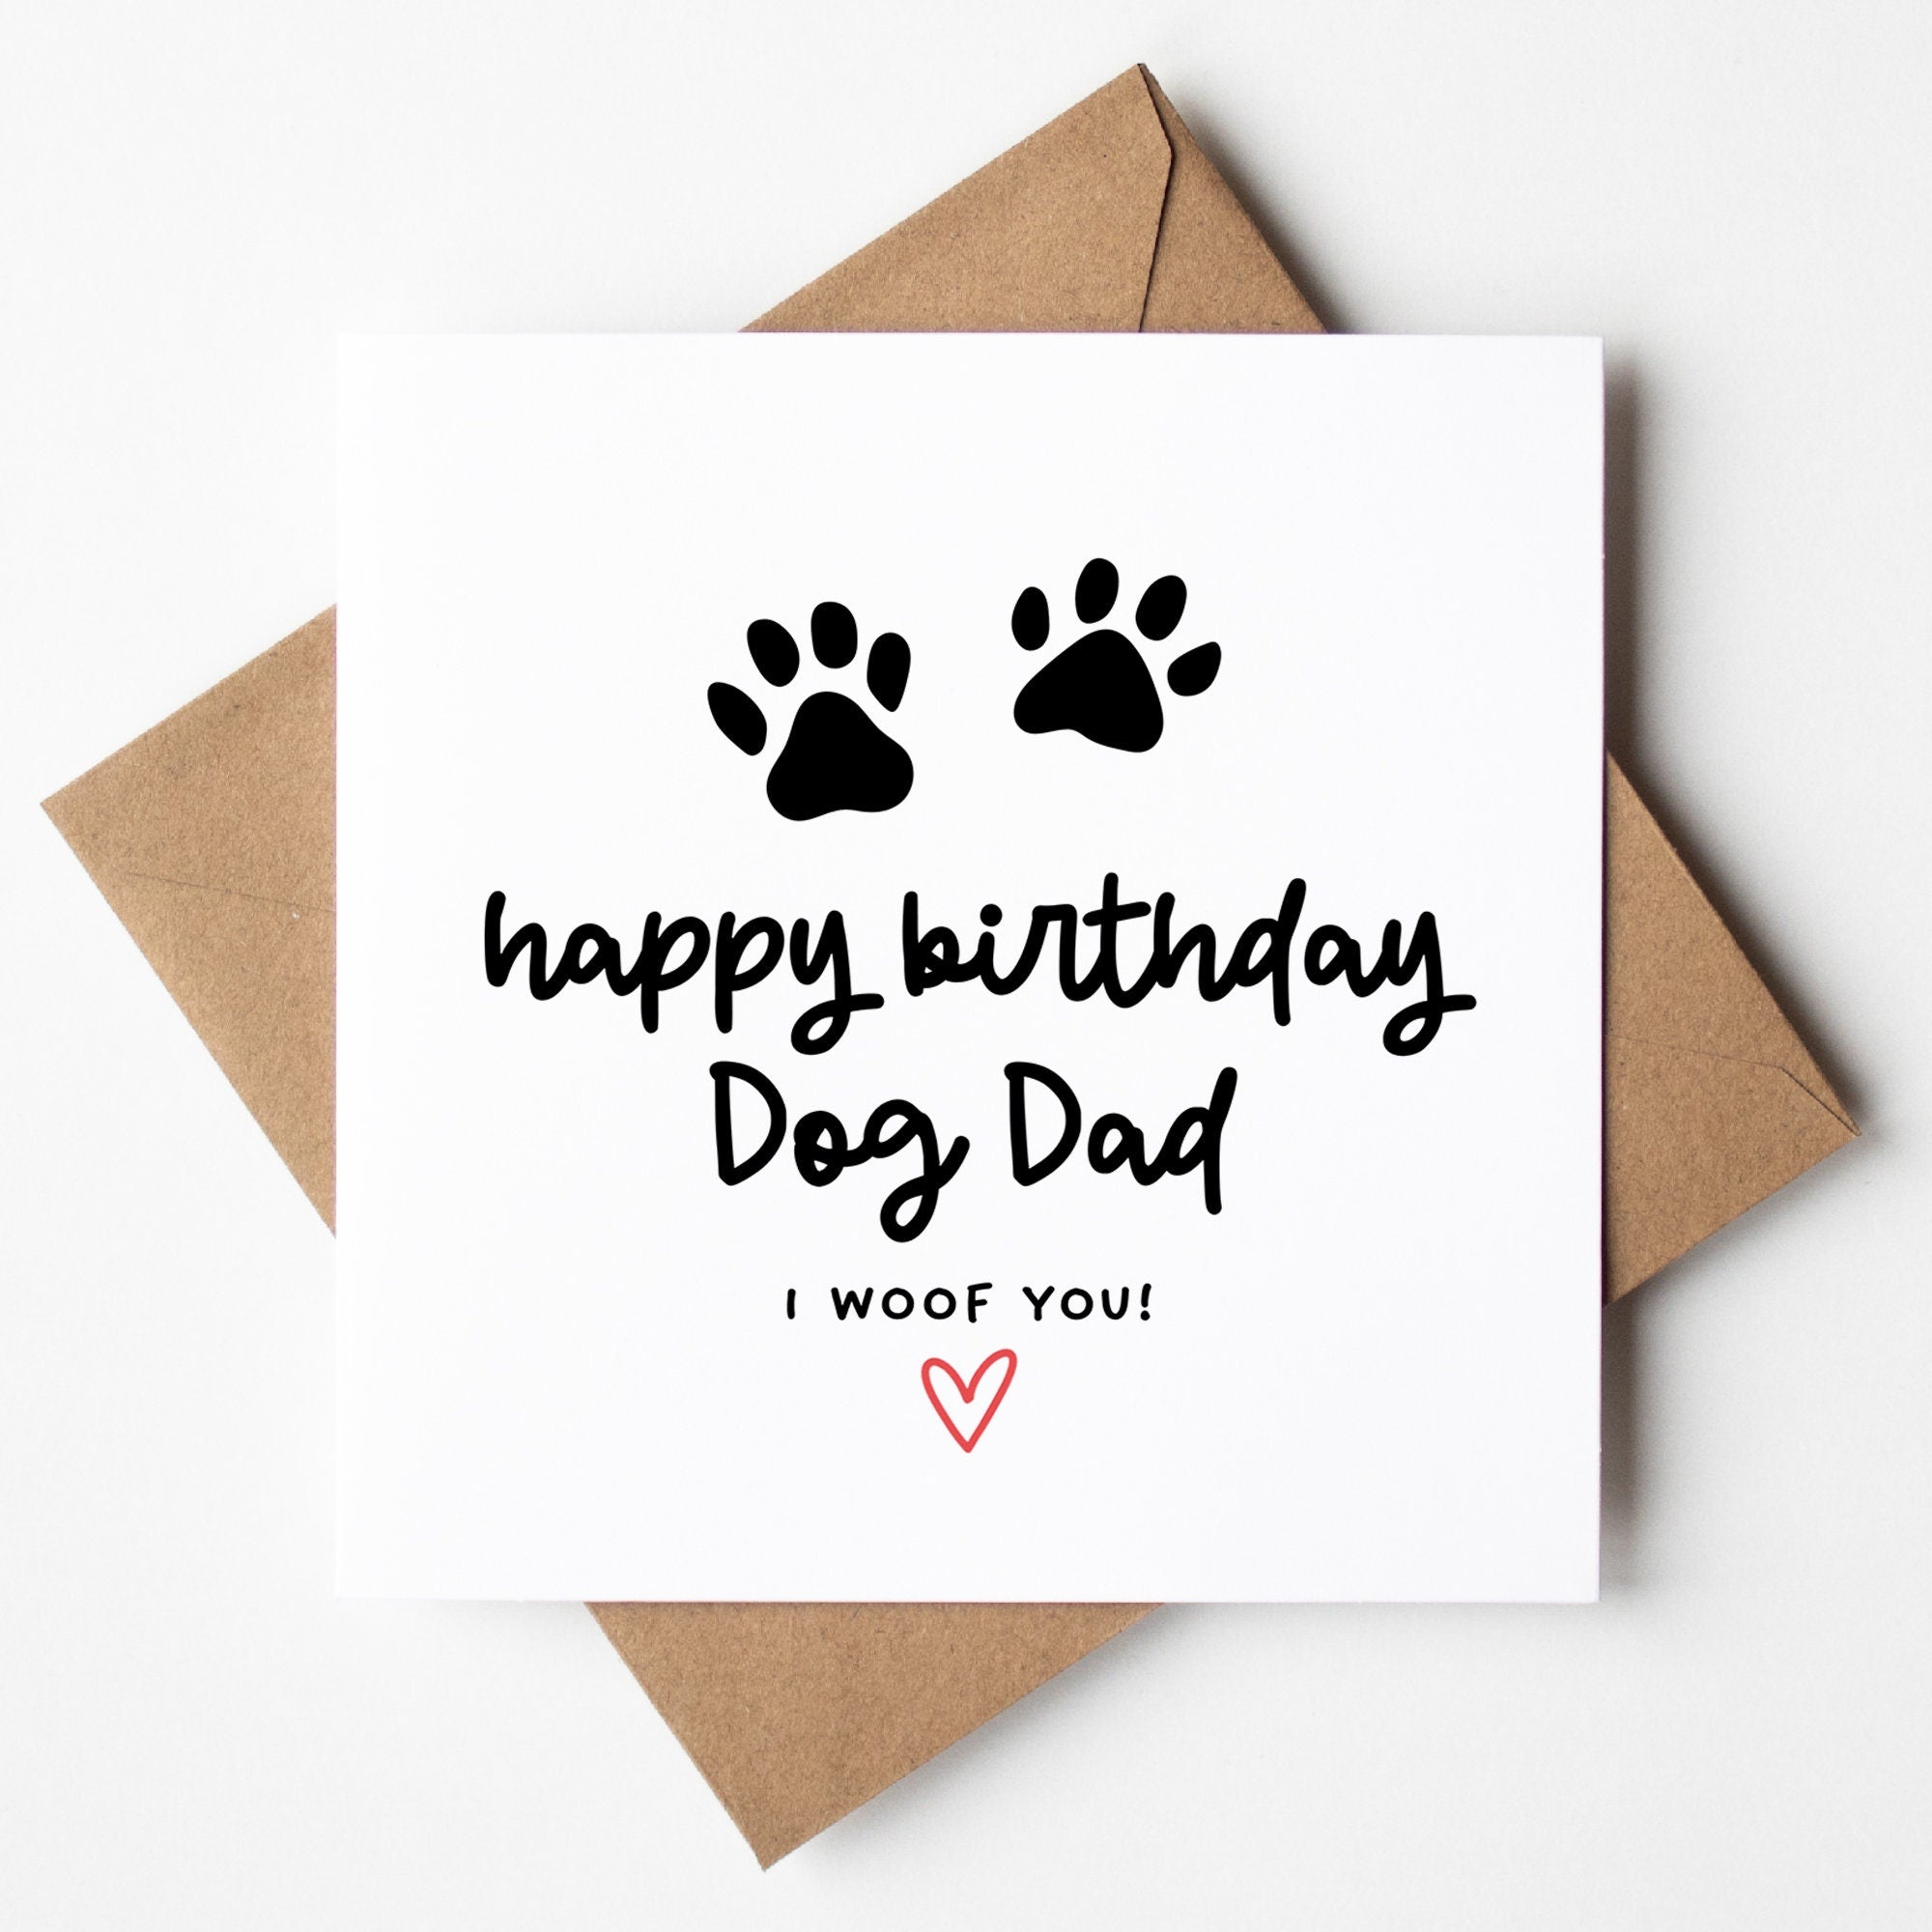 Dog Dad Gift - Happy Birthday From The Dog Card